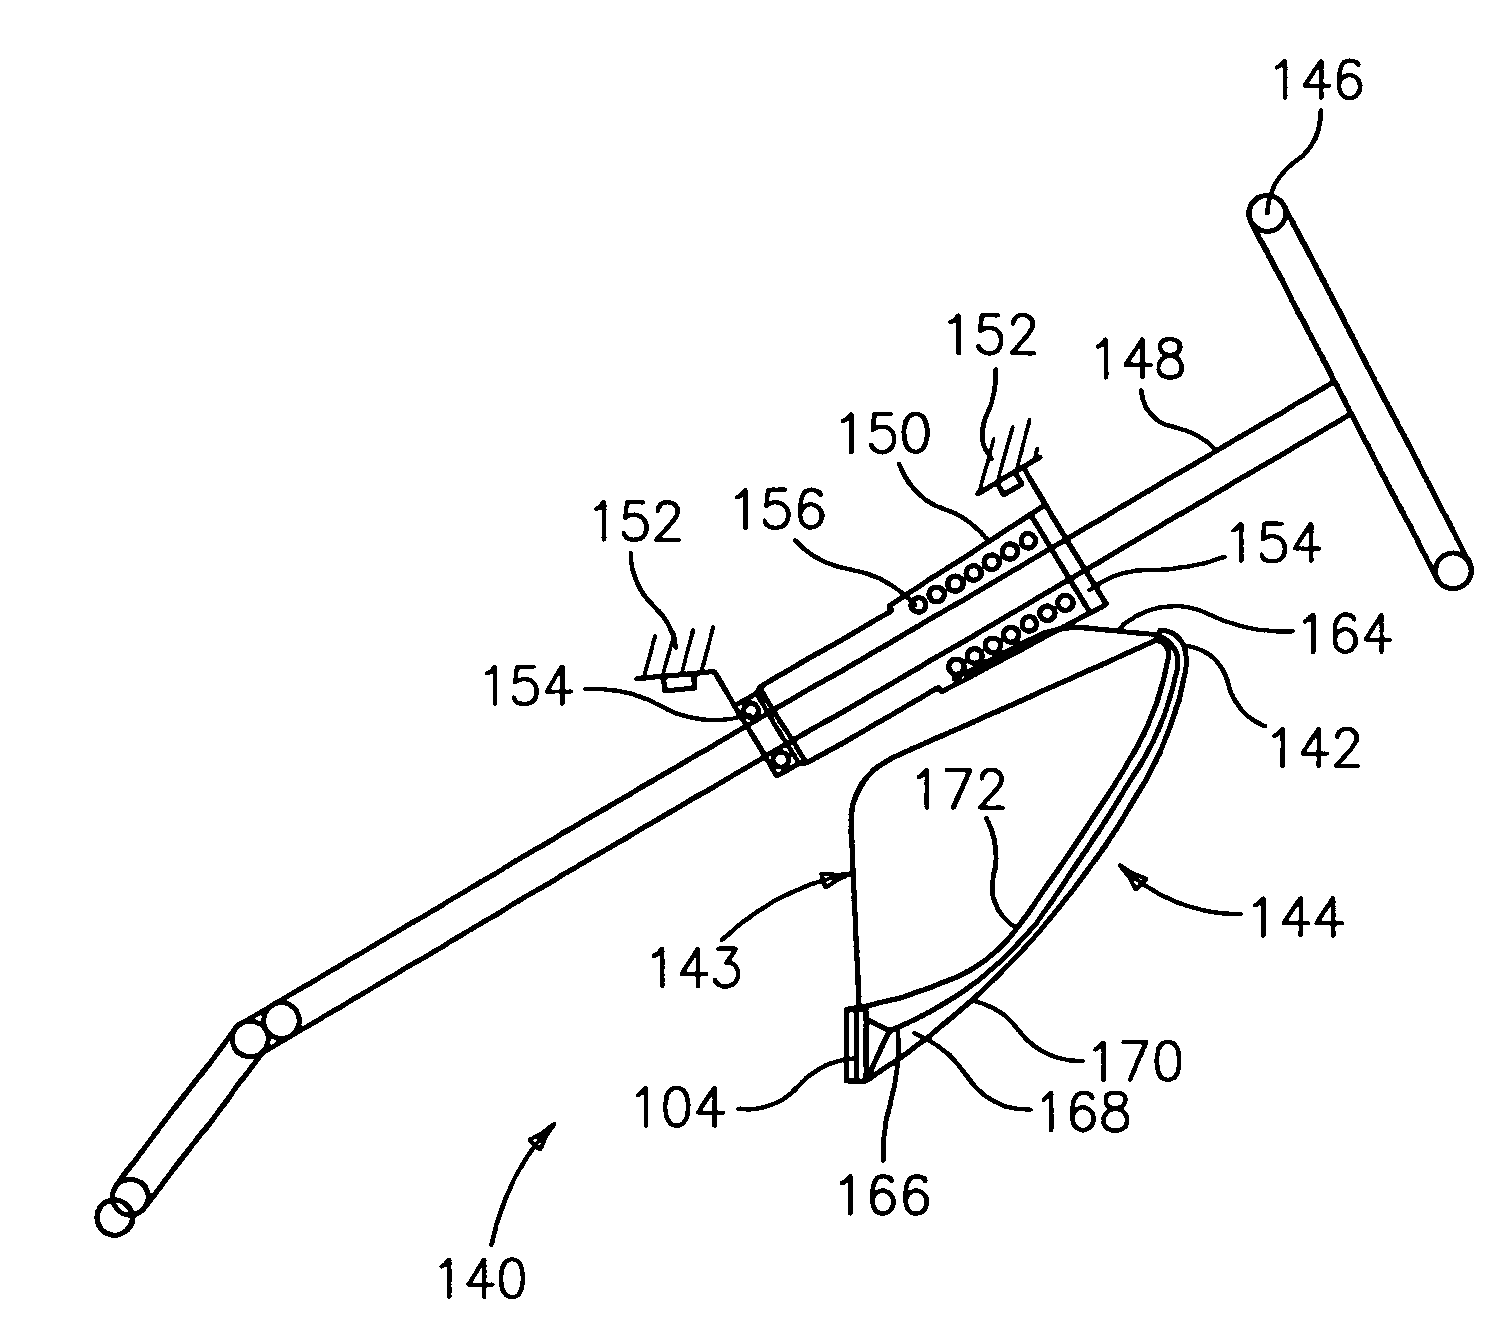 Volume-filling mechanical structures with means for deploying same in a bolster system